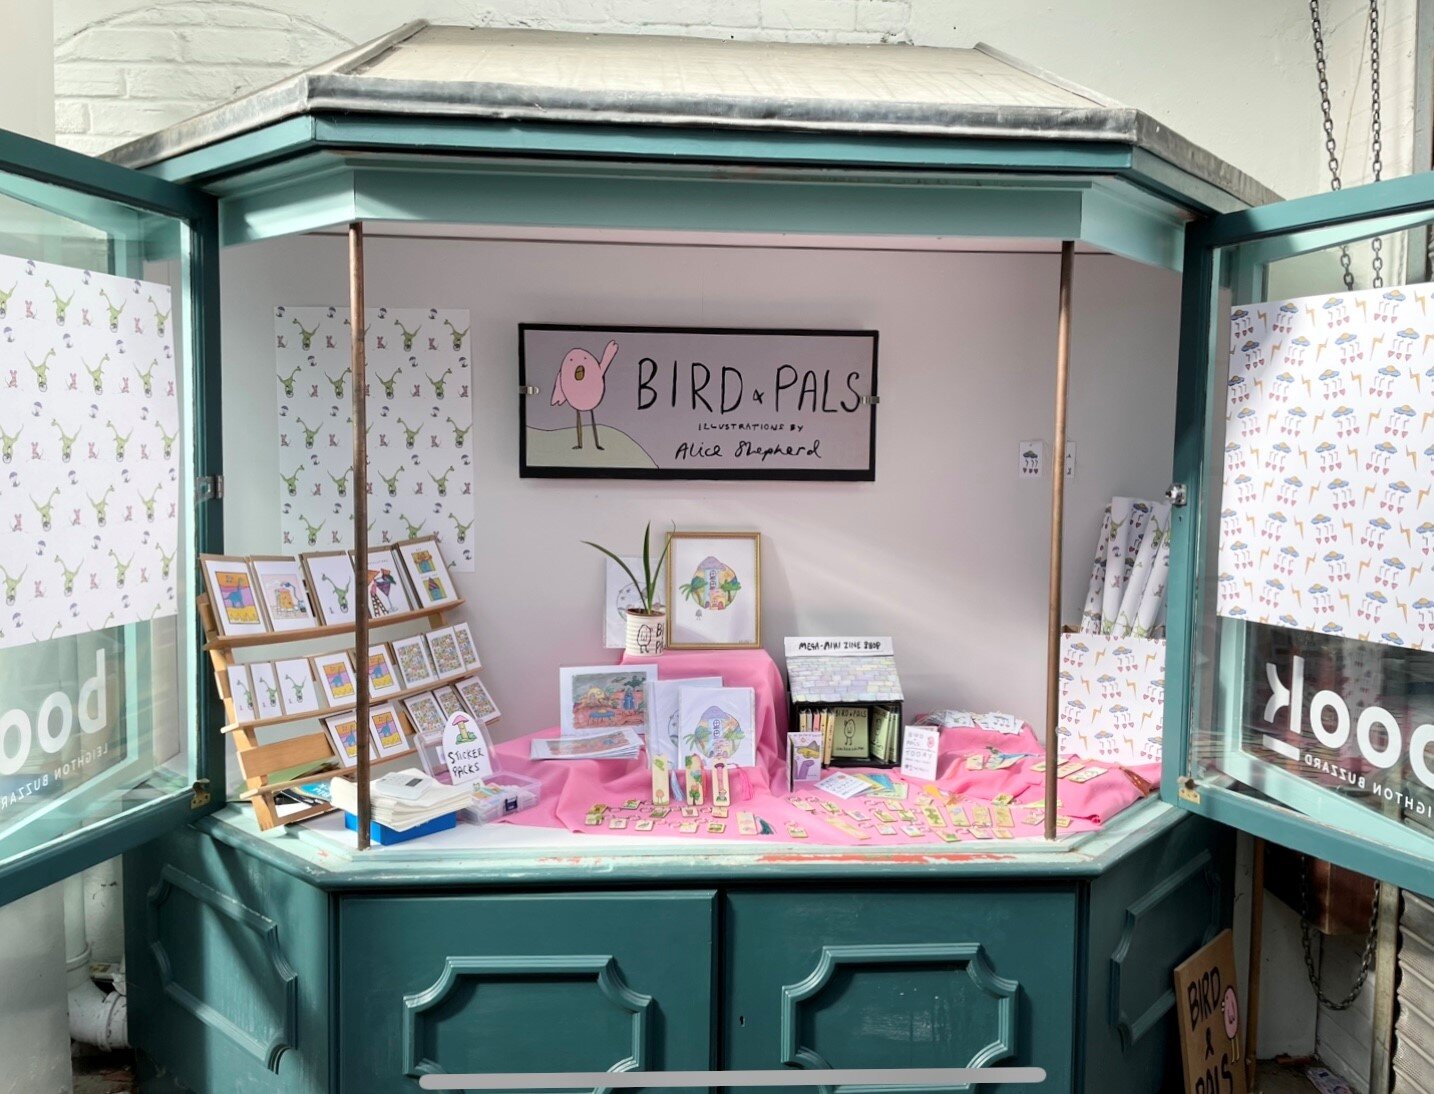 We are hosting the @bird.and.pals tiny pop-up shop again today with cards, gift wrap, prints, hand made bookmarks, keyrings and stickers. Come along and say 'hello' if you are in town today
.
.
.
.
.
.
#booklb #birdandpals #leightonbuzzard #lovelocal